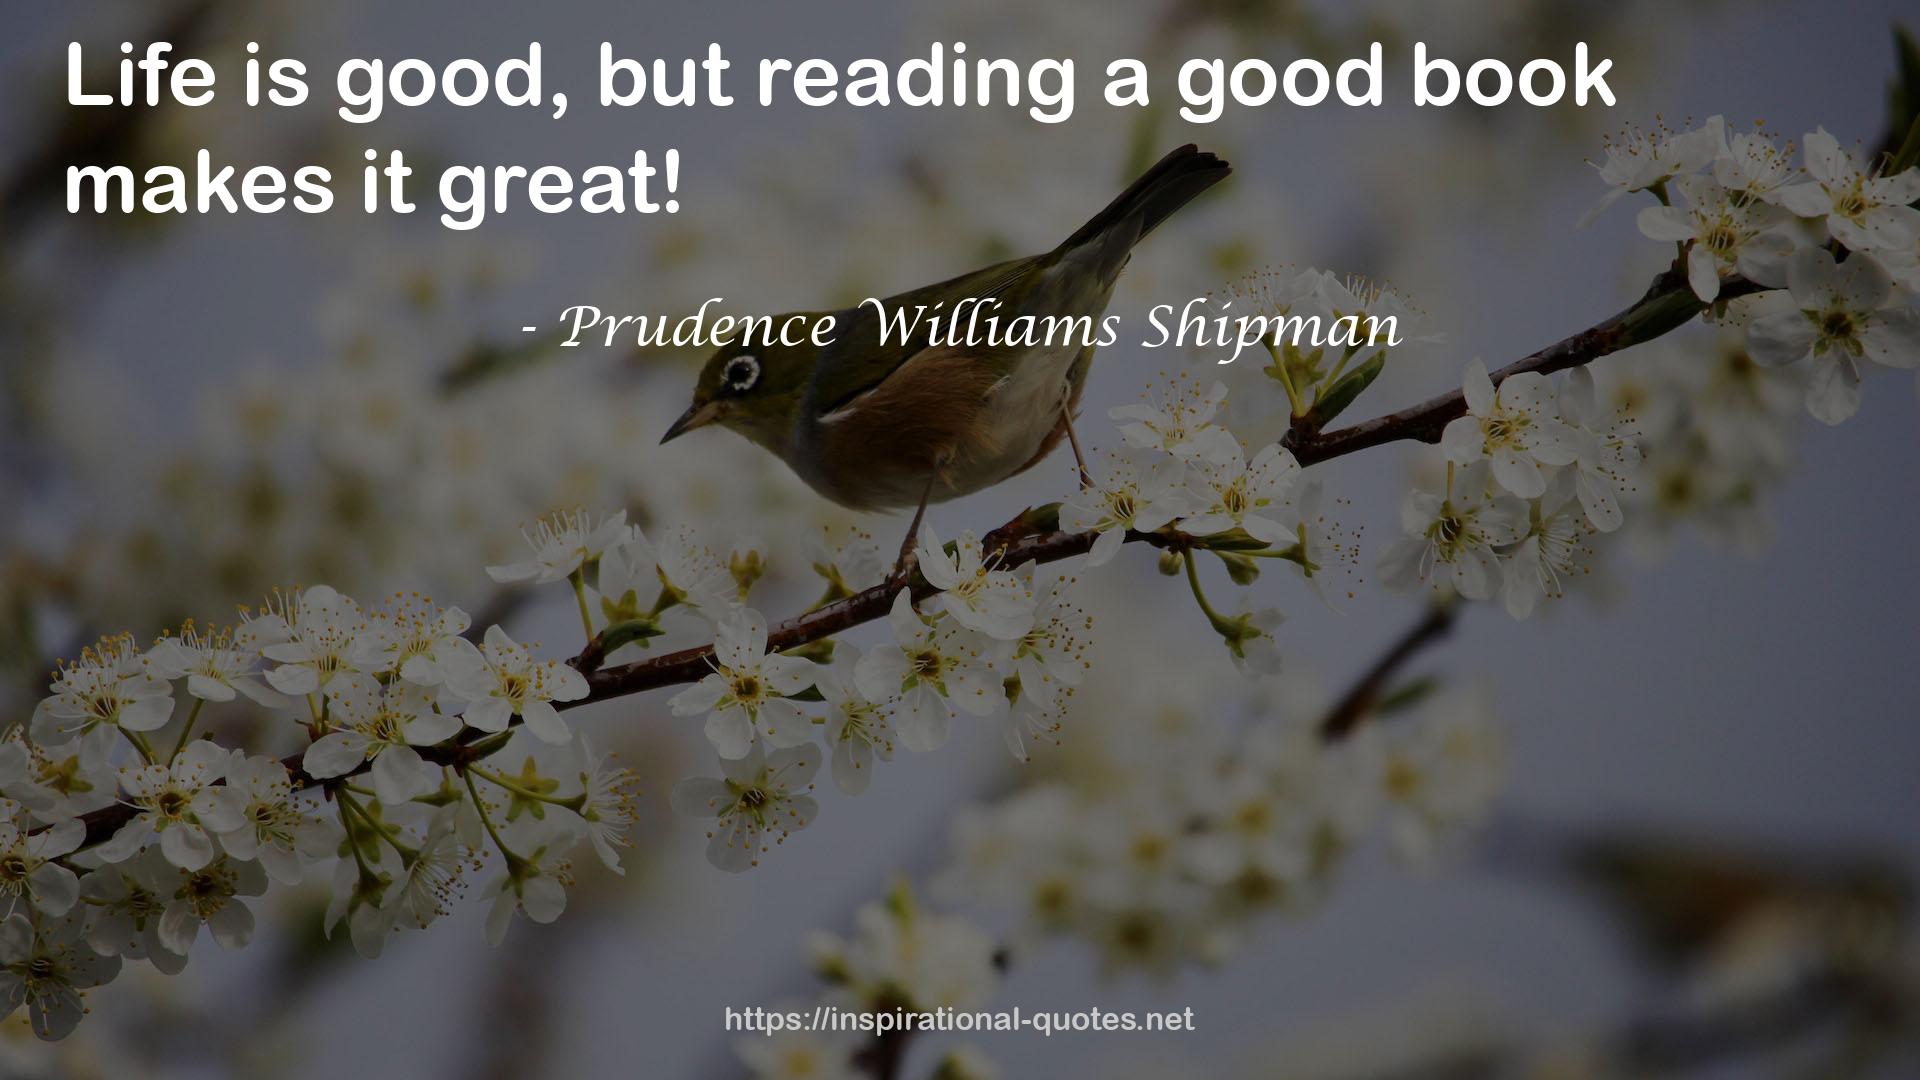 Prudence Williams Shipman QUOTES